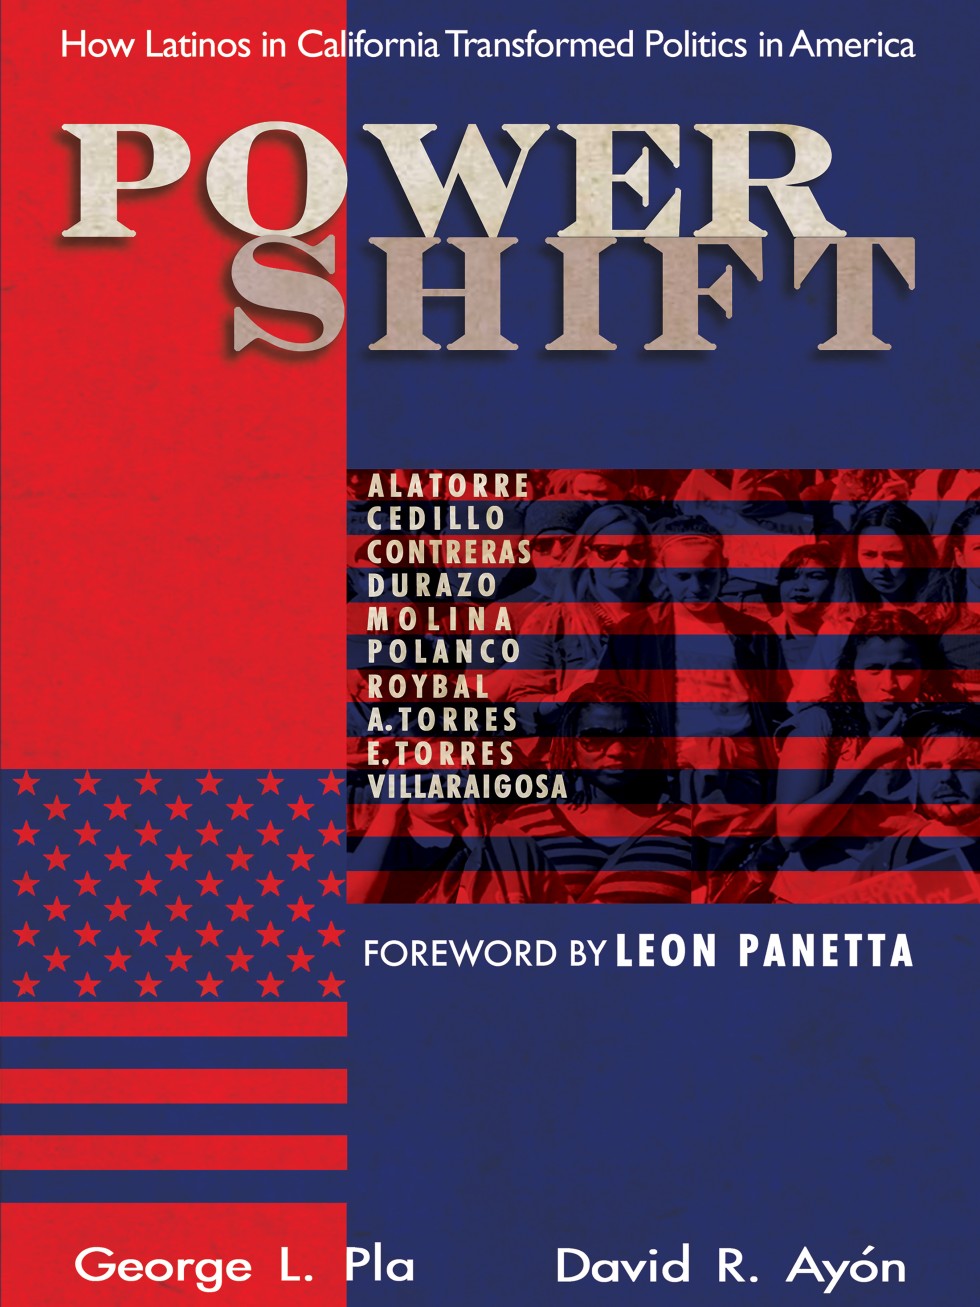 Power Shift book cover